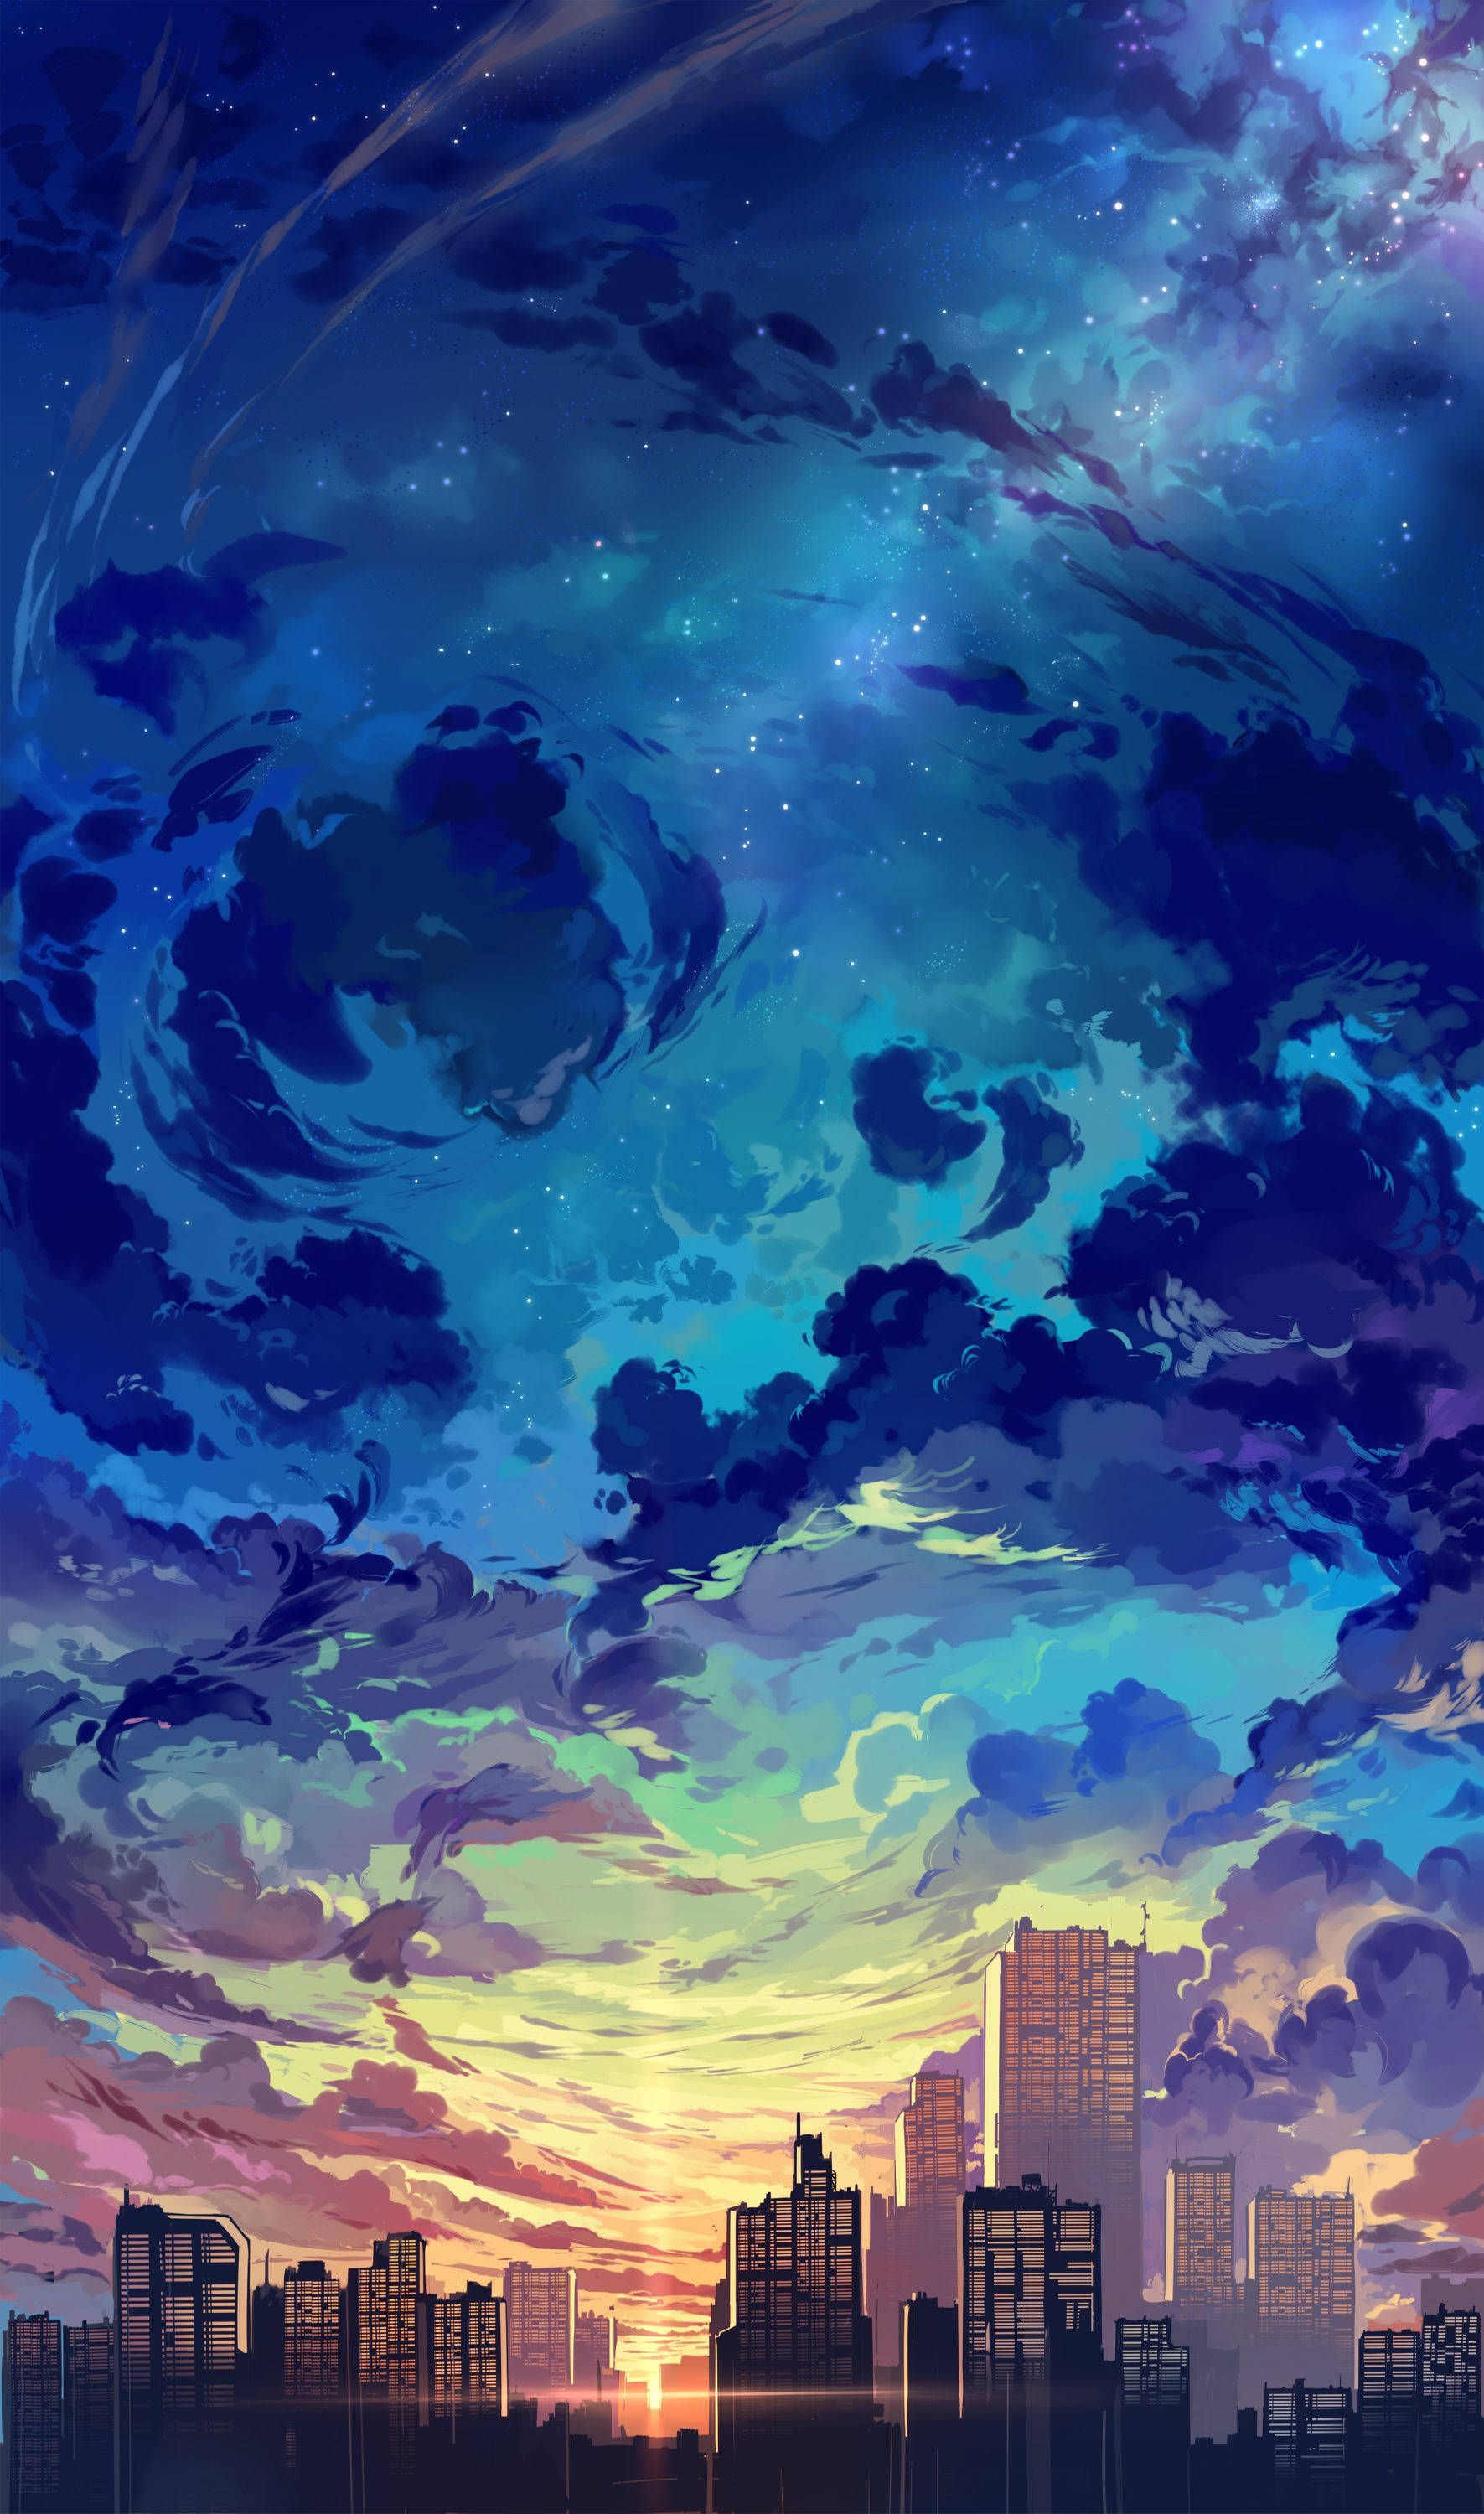 Aesthetic anime city wallpaper for mobiles and tablets. - Phone, scenery, anime, Android, anime landscape